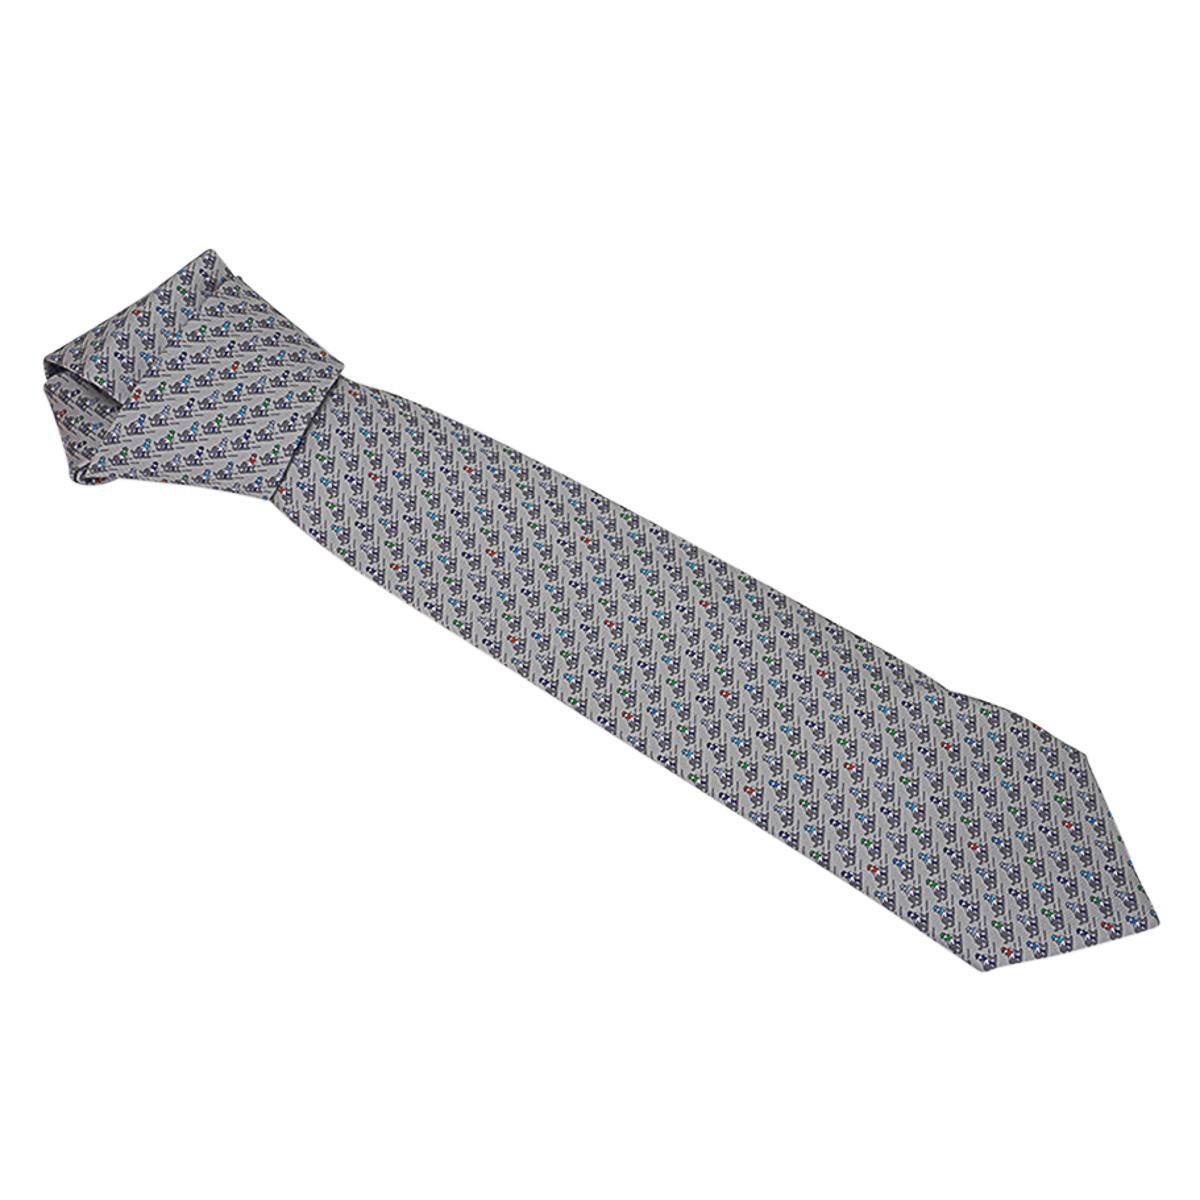 Hermes Sliding Jockey Twillbi Tie Gris Anthracite Blue In New Condition For Sale In Miami, FL